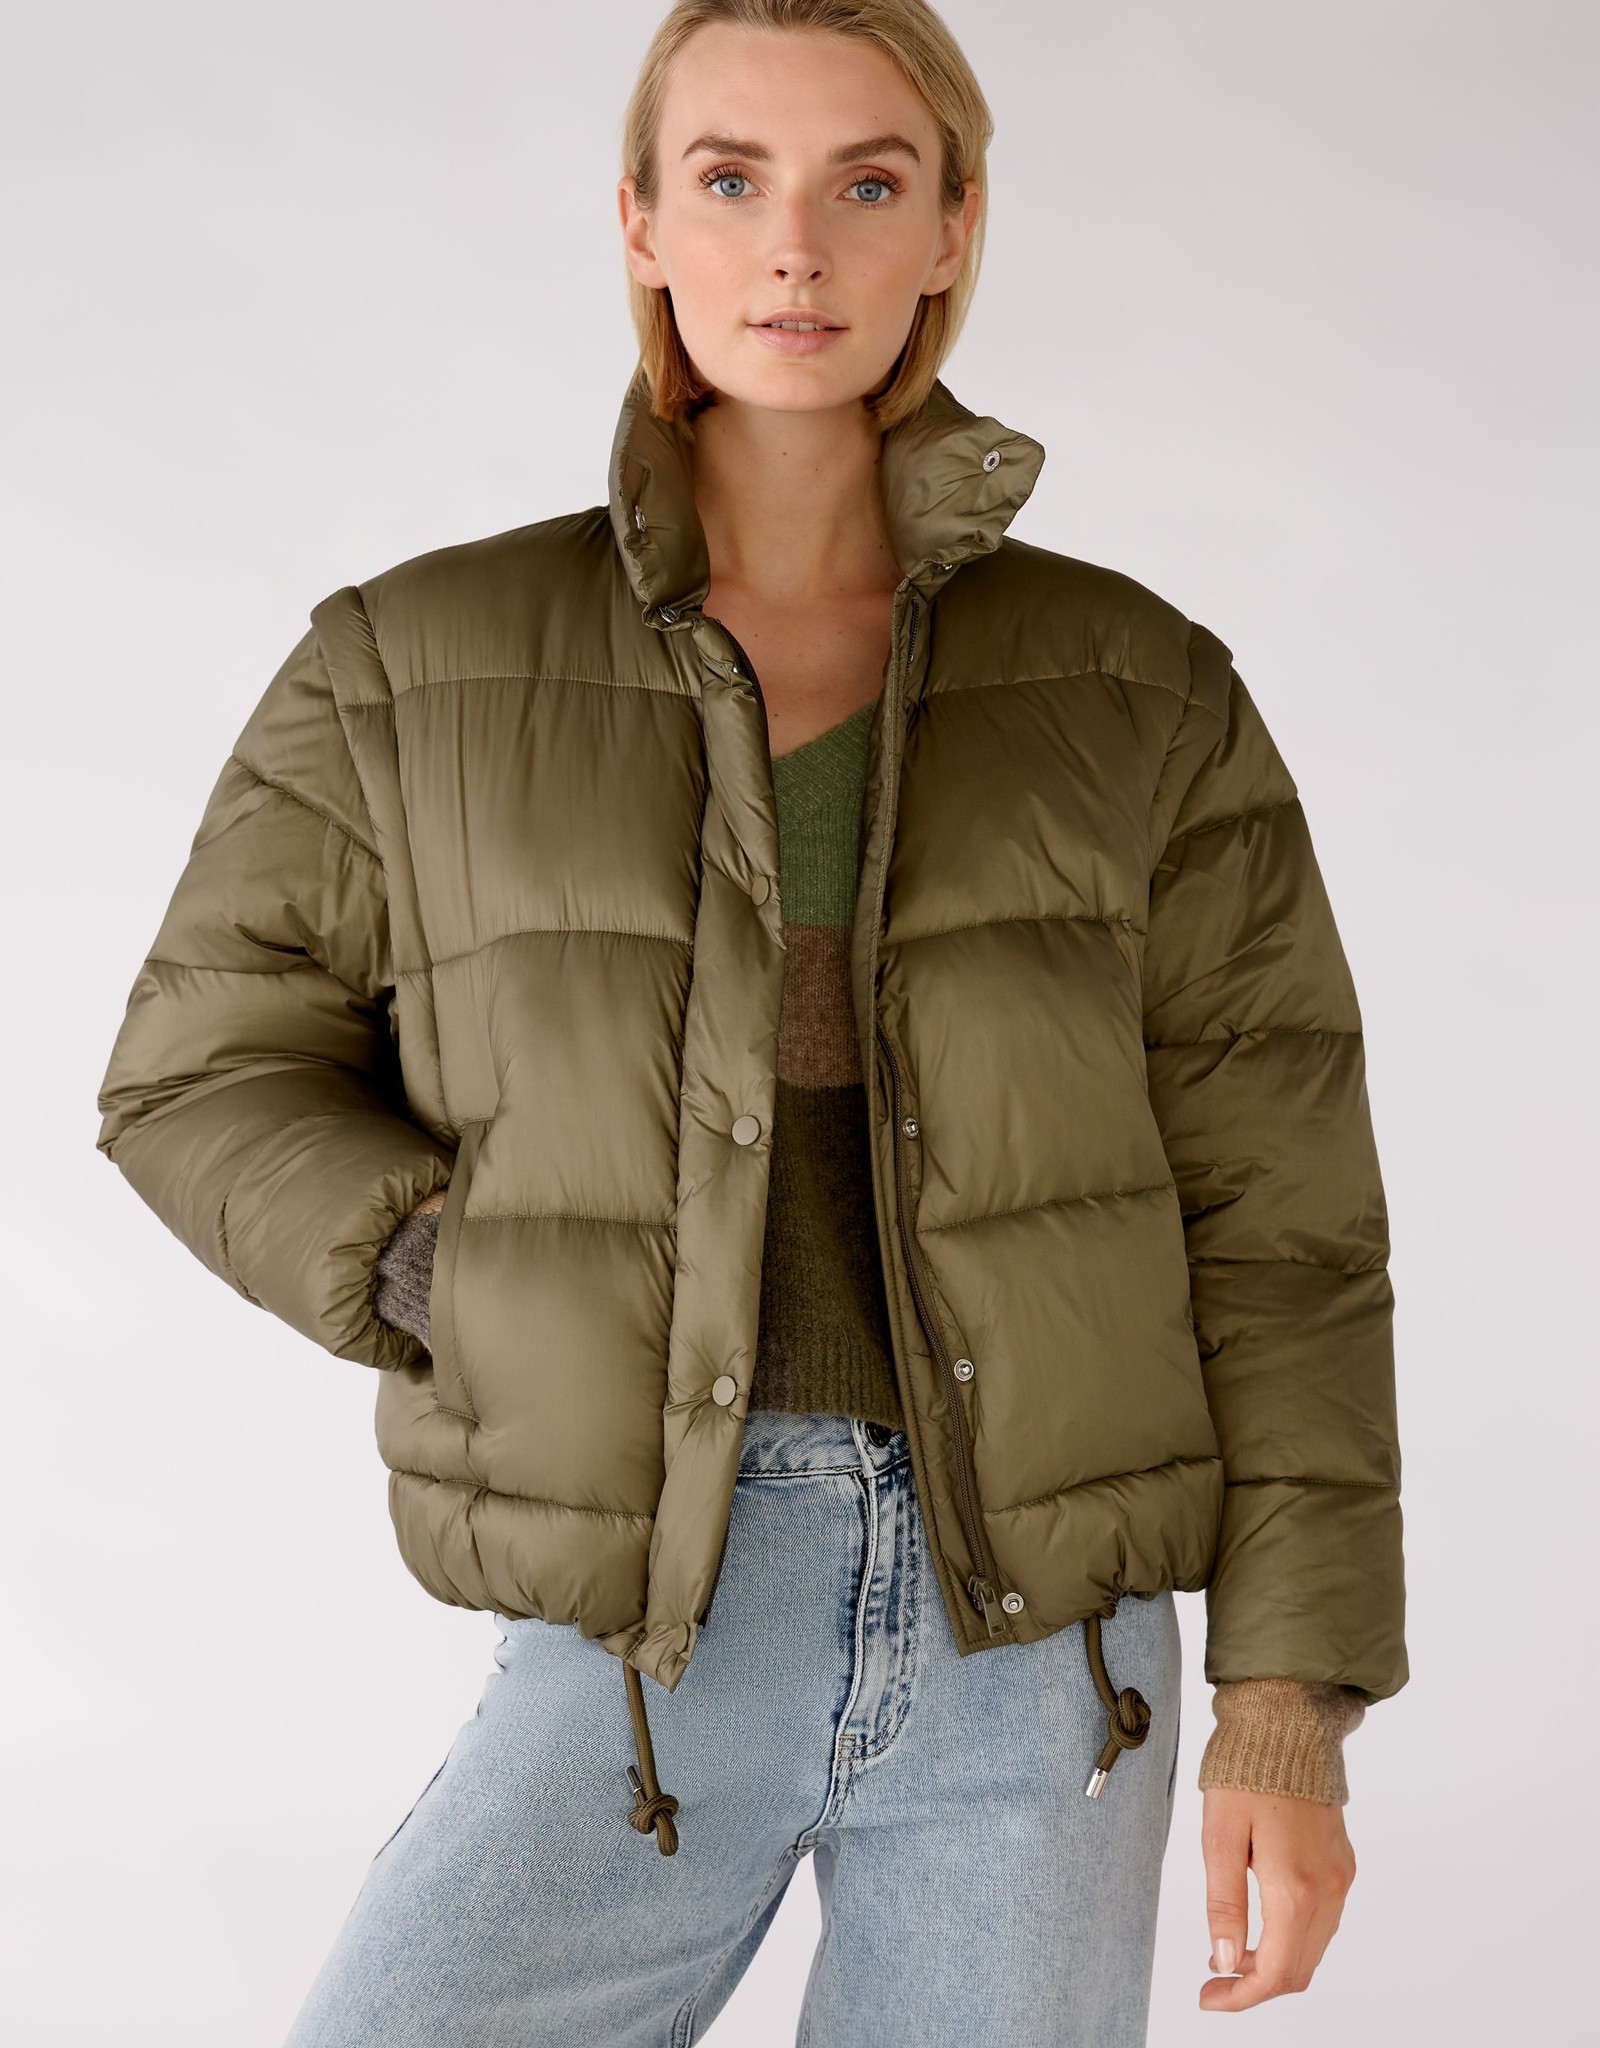 Ouí 76874 Outdoor Jacket